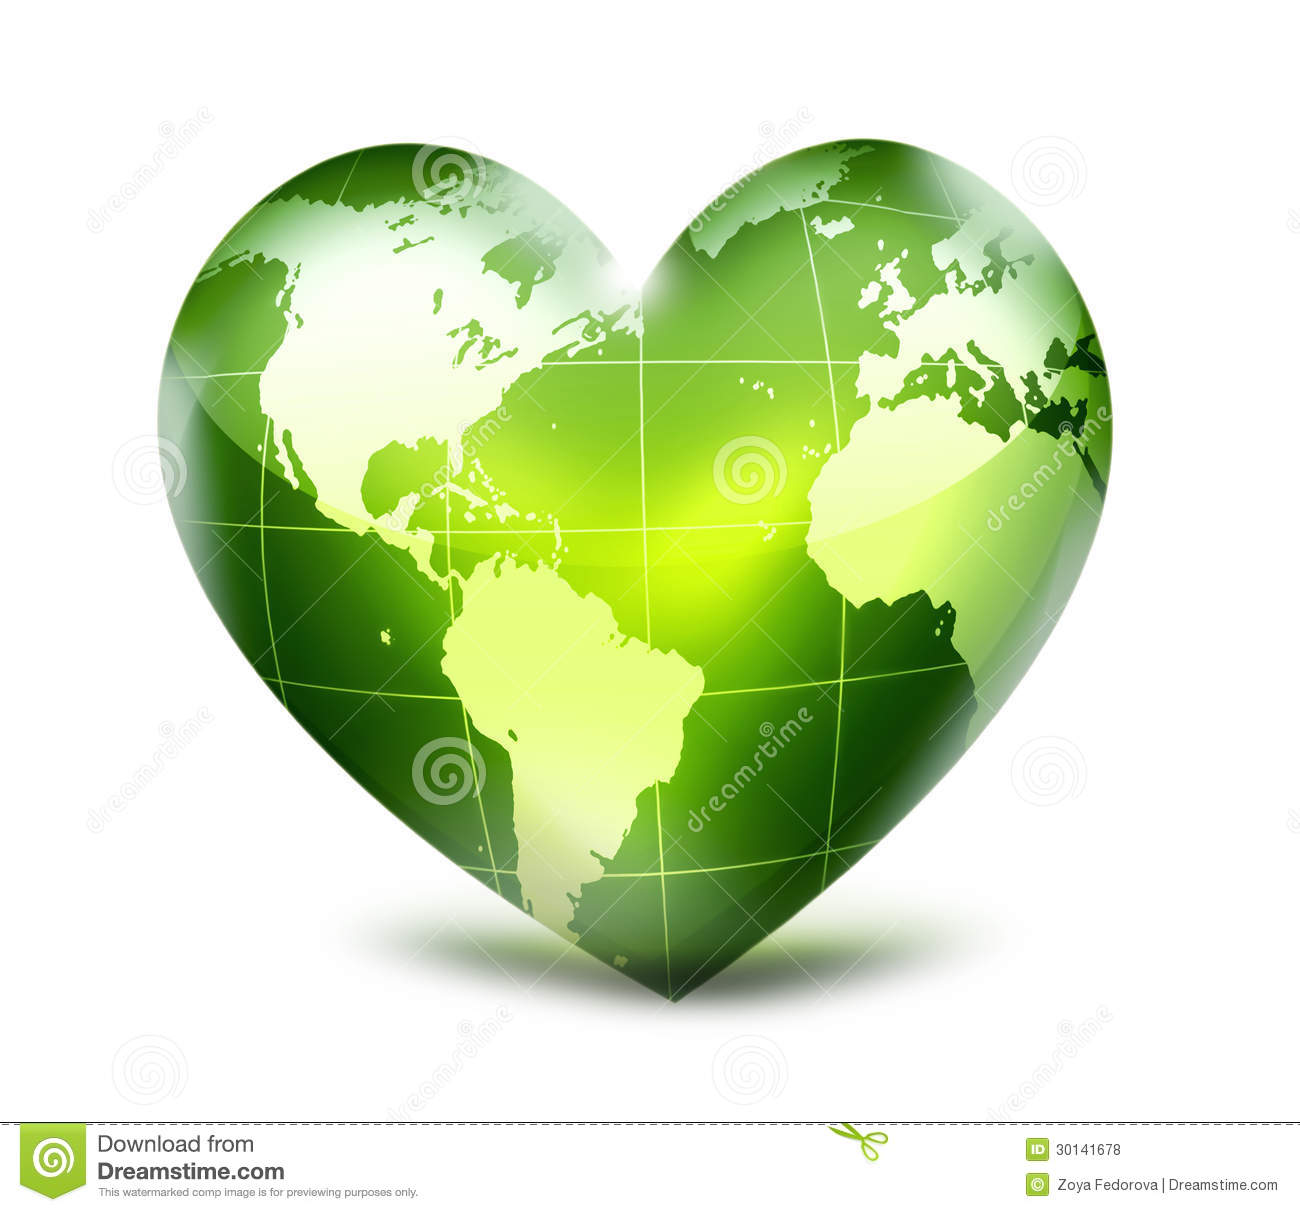 World Map with Heart Symbol